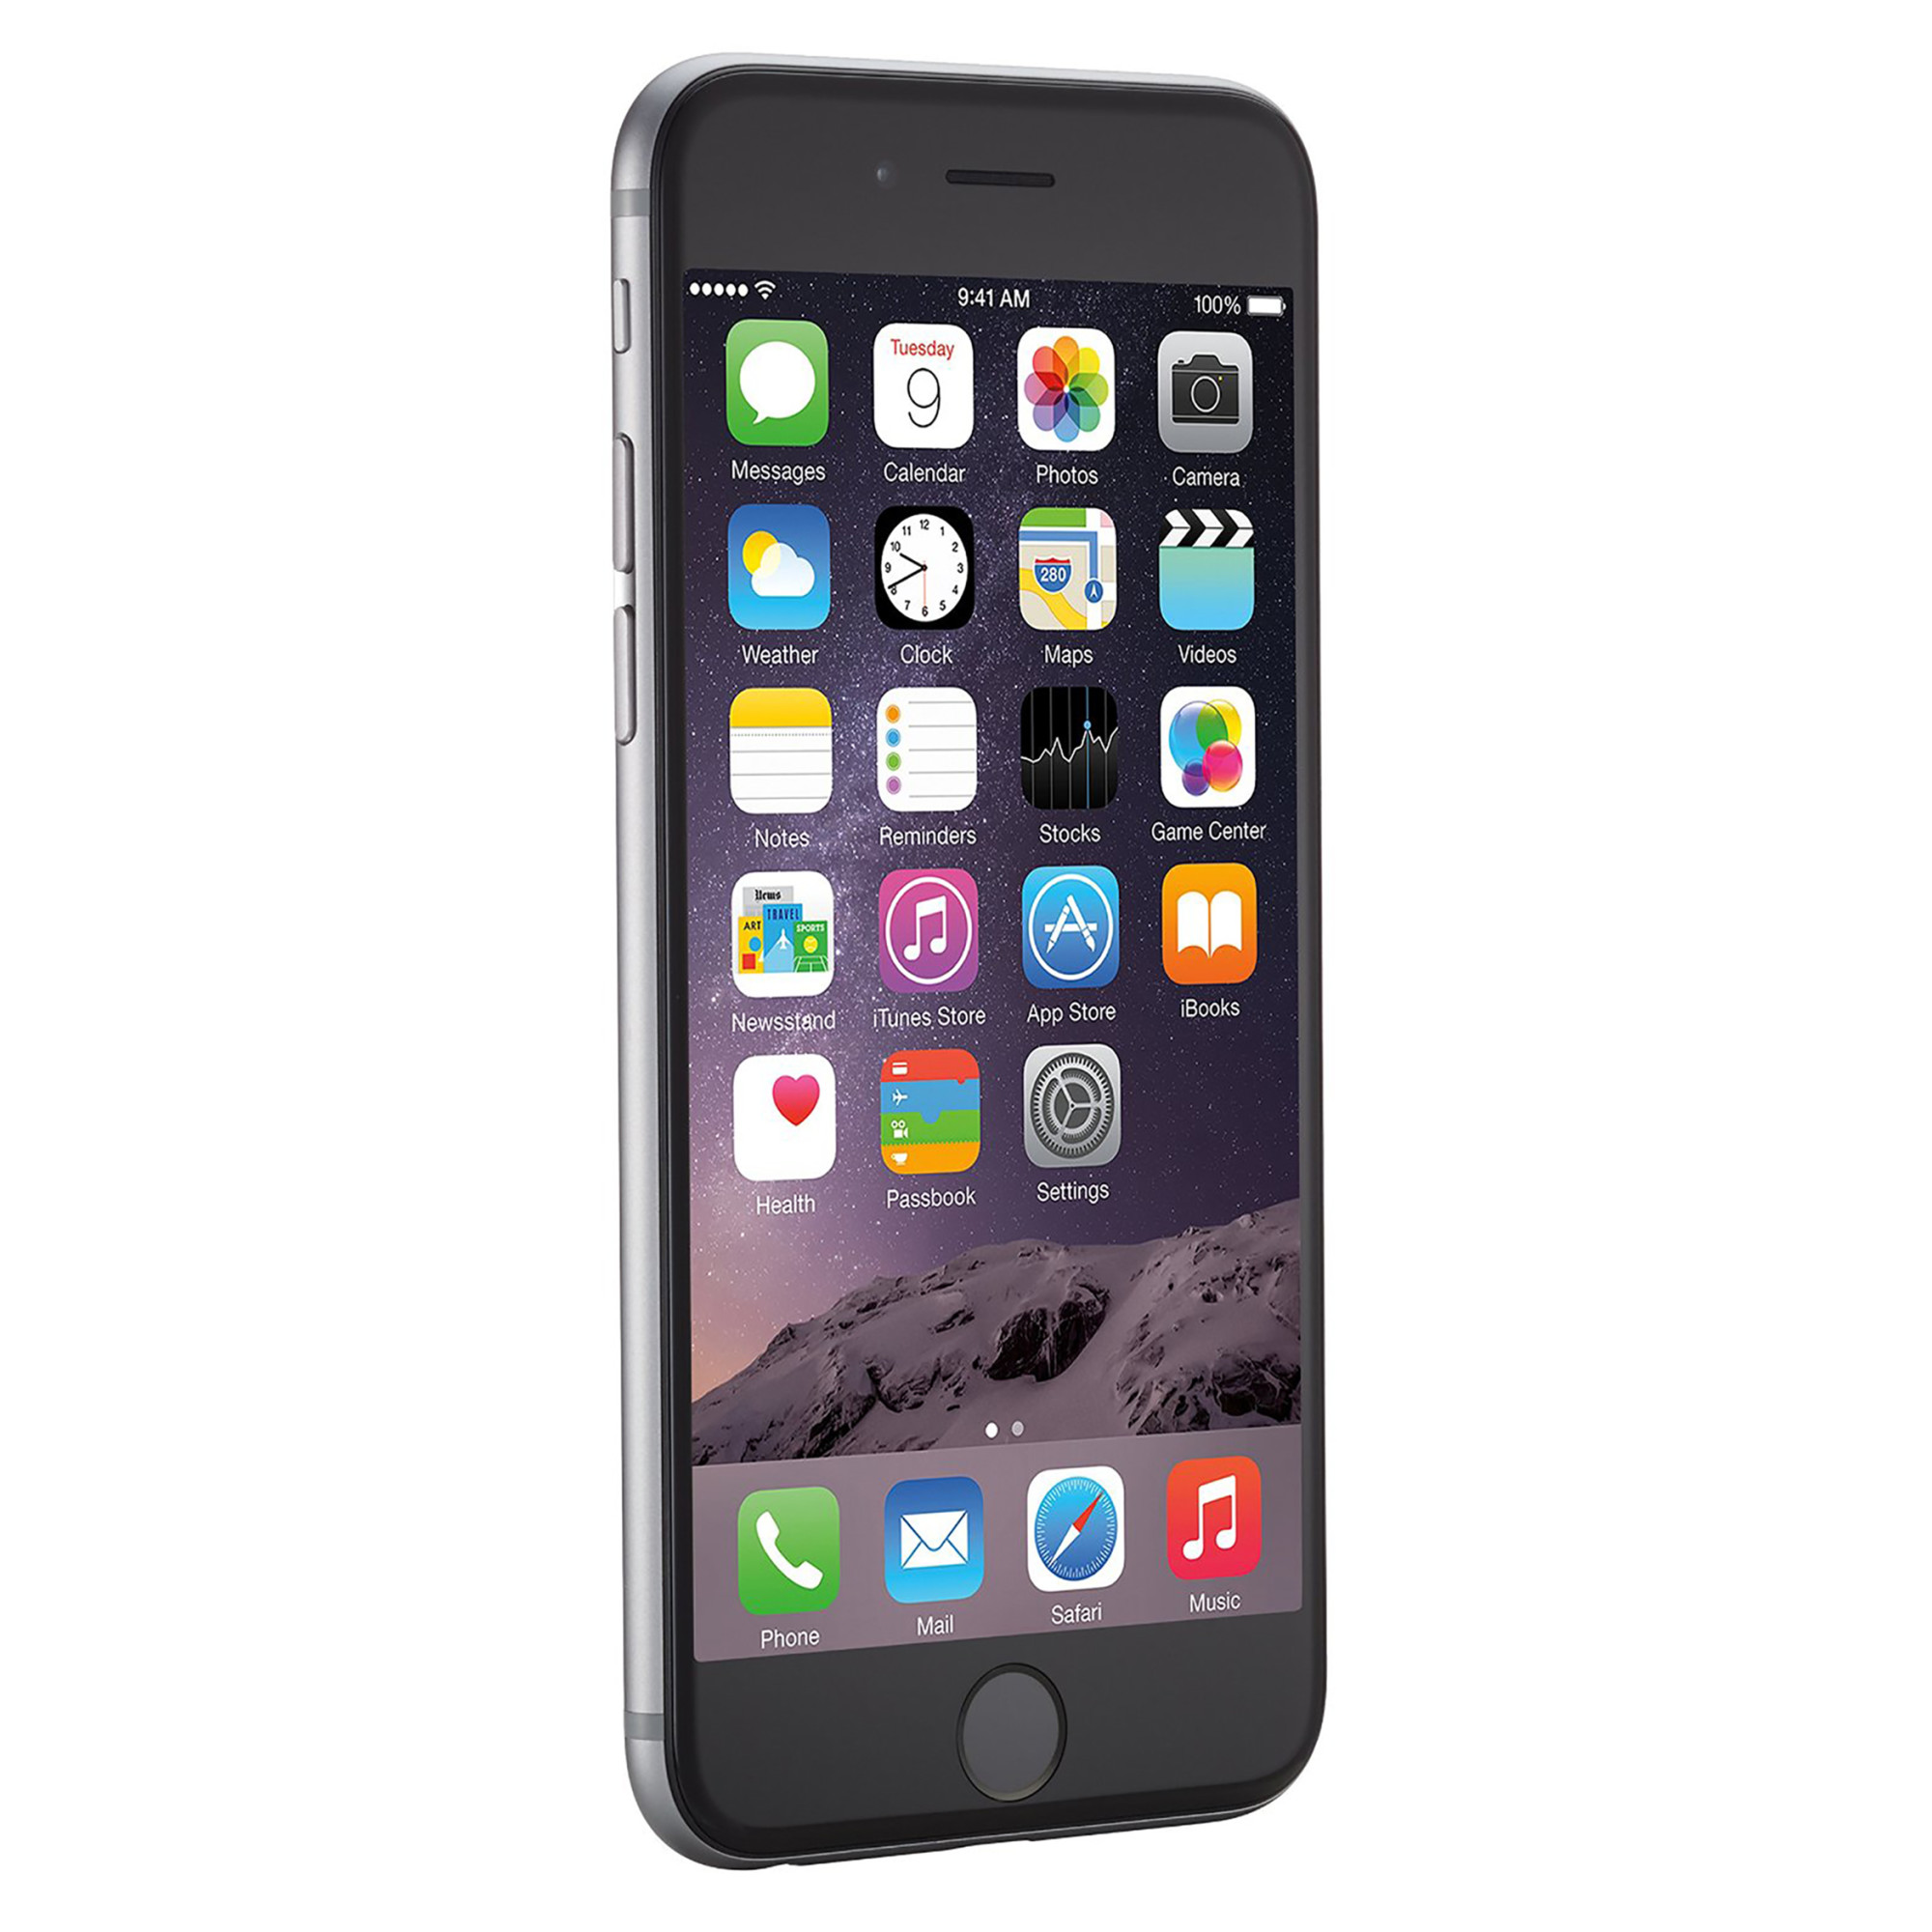 Apple iPhone 6 Plus 64GB Unlocked GSM Phone with 8MP Camera - Space Gray (Used) - image 3 of 3